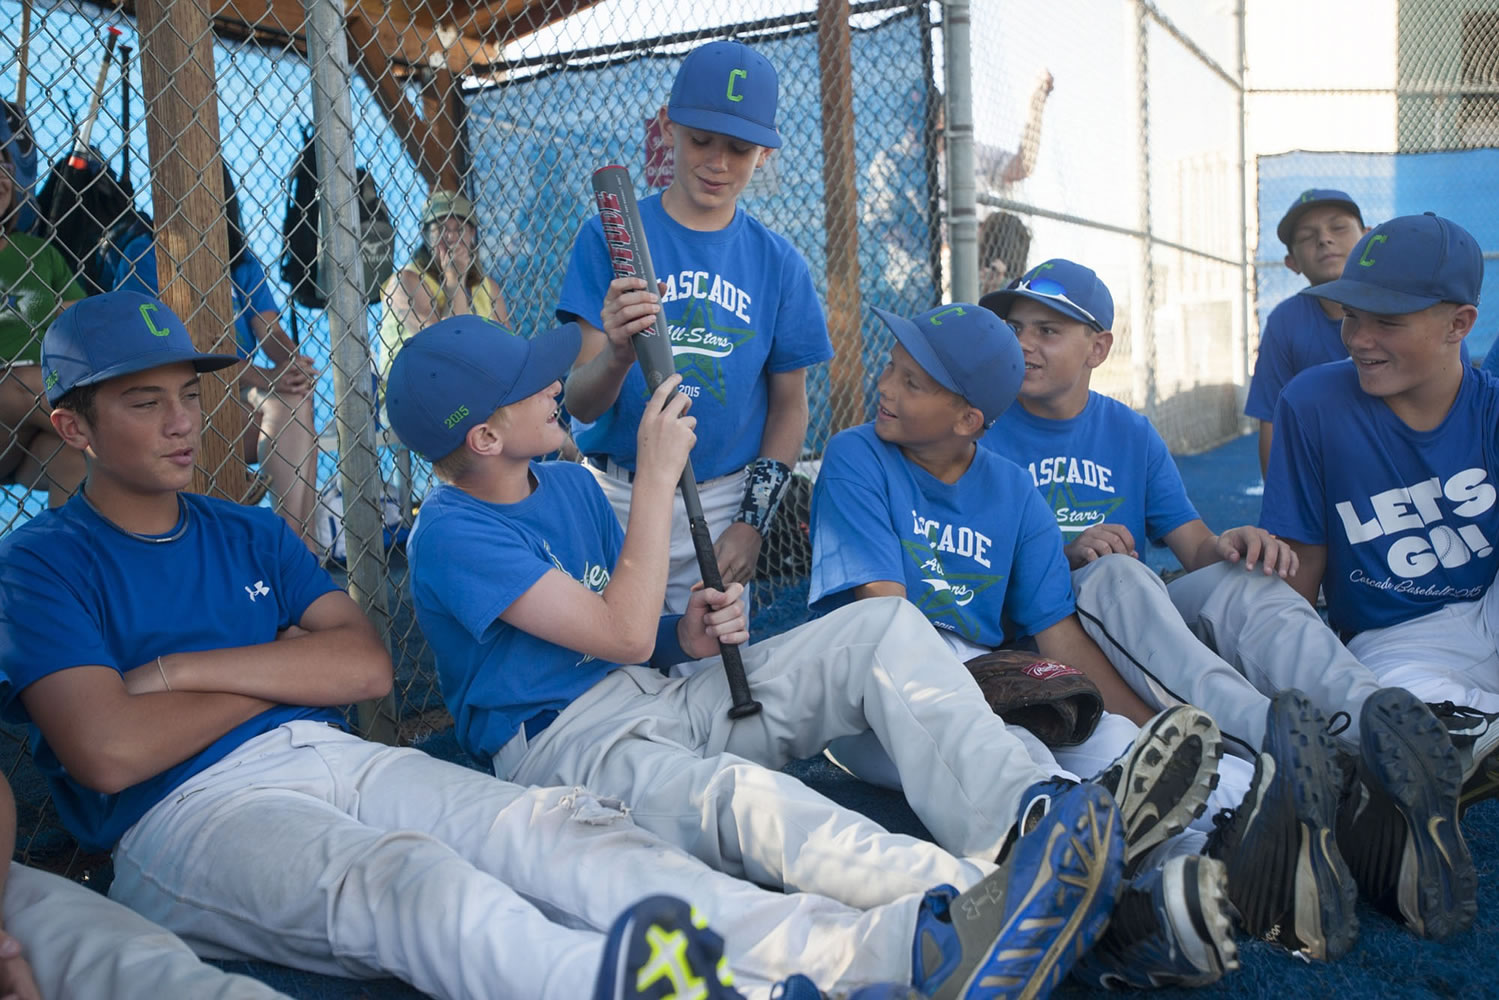 Ben Jones (2nd from left) and his teammates from the Cascade Little League look at a bat from the 2000 Little League World Series given to them by Jay Ponciano, who played on that Hazel Dell team.